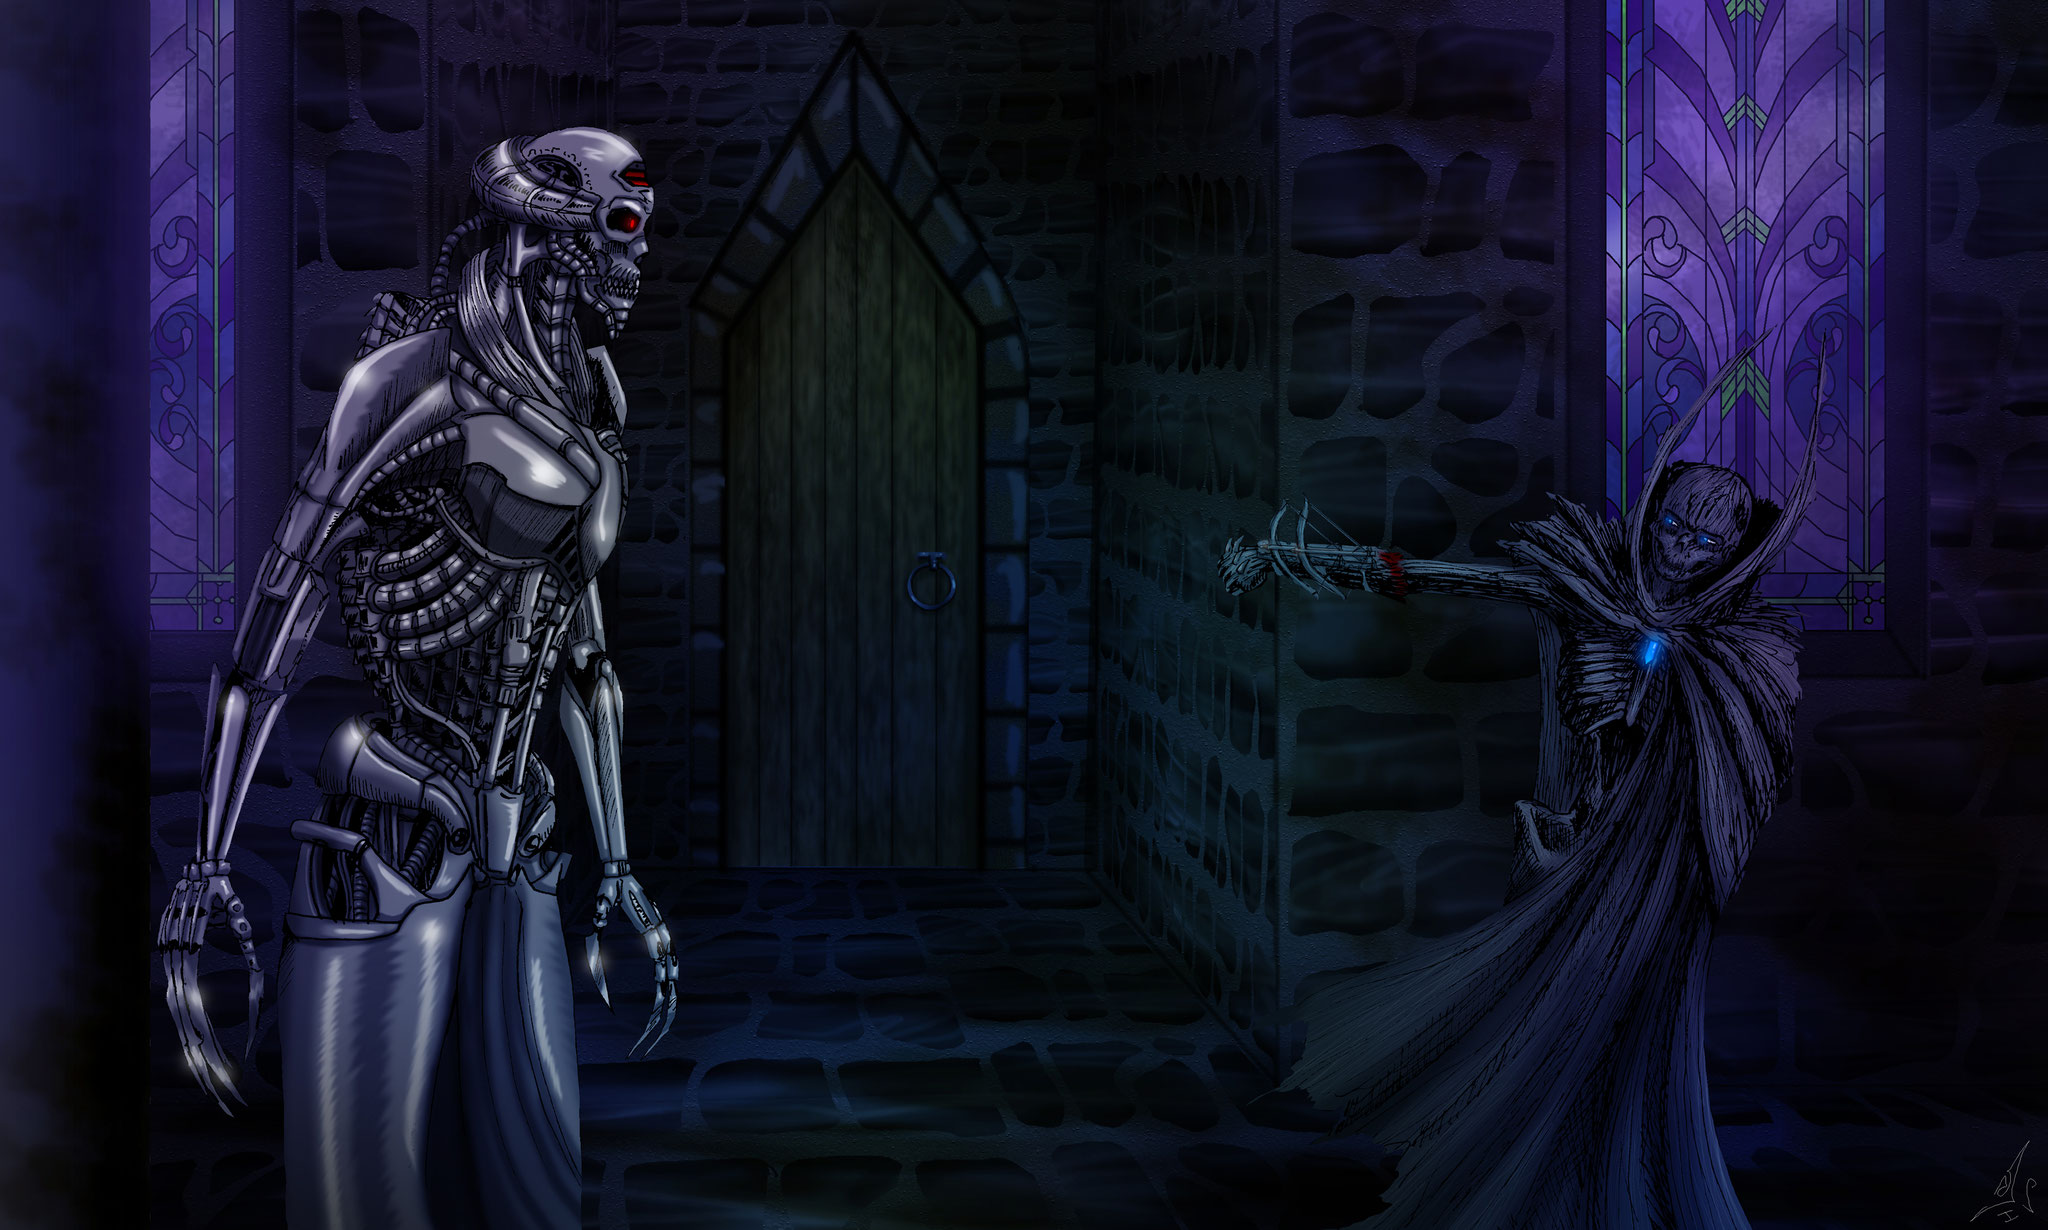 Alister's character and Iarukalb the reaper